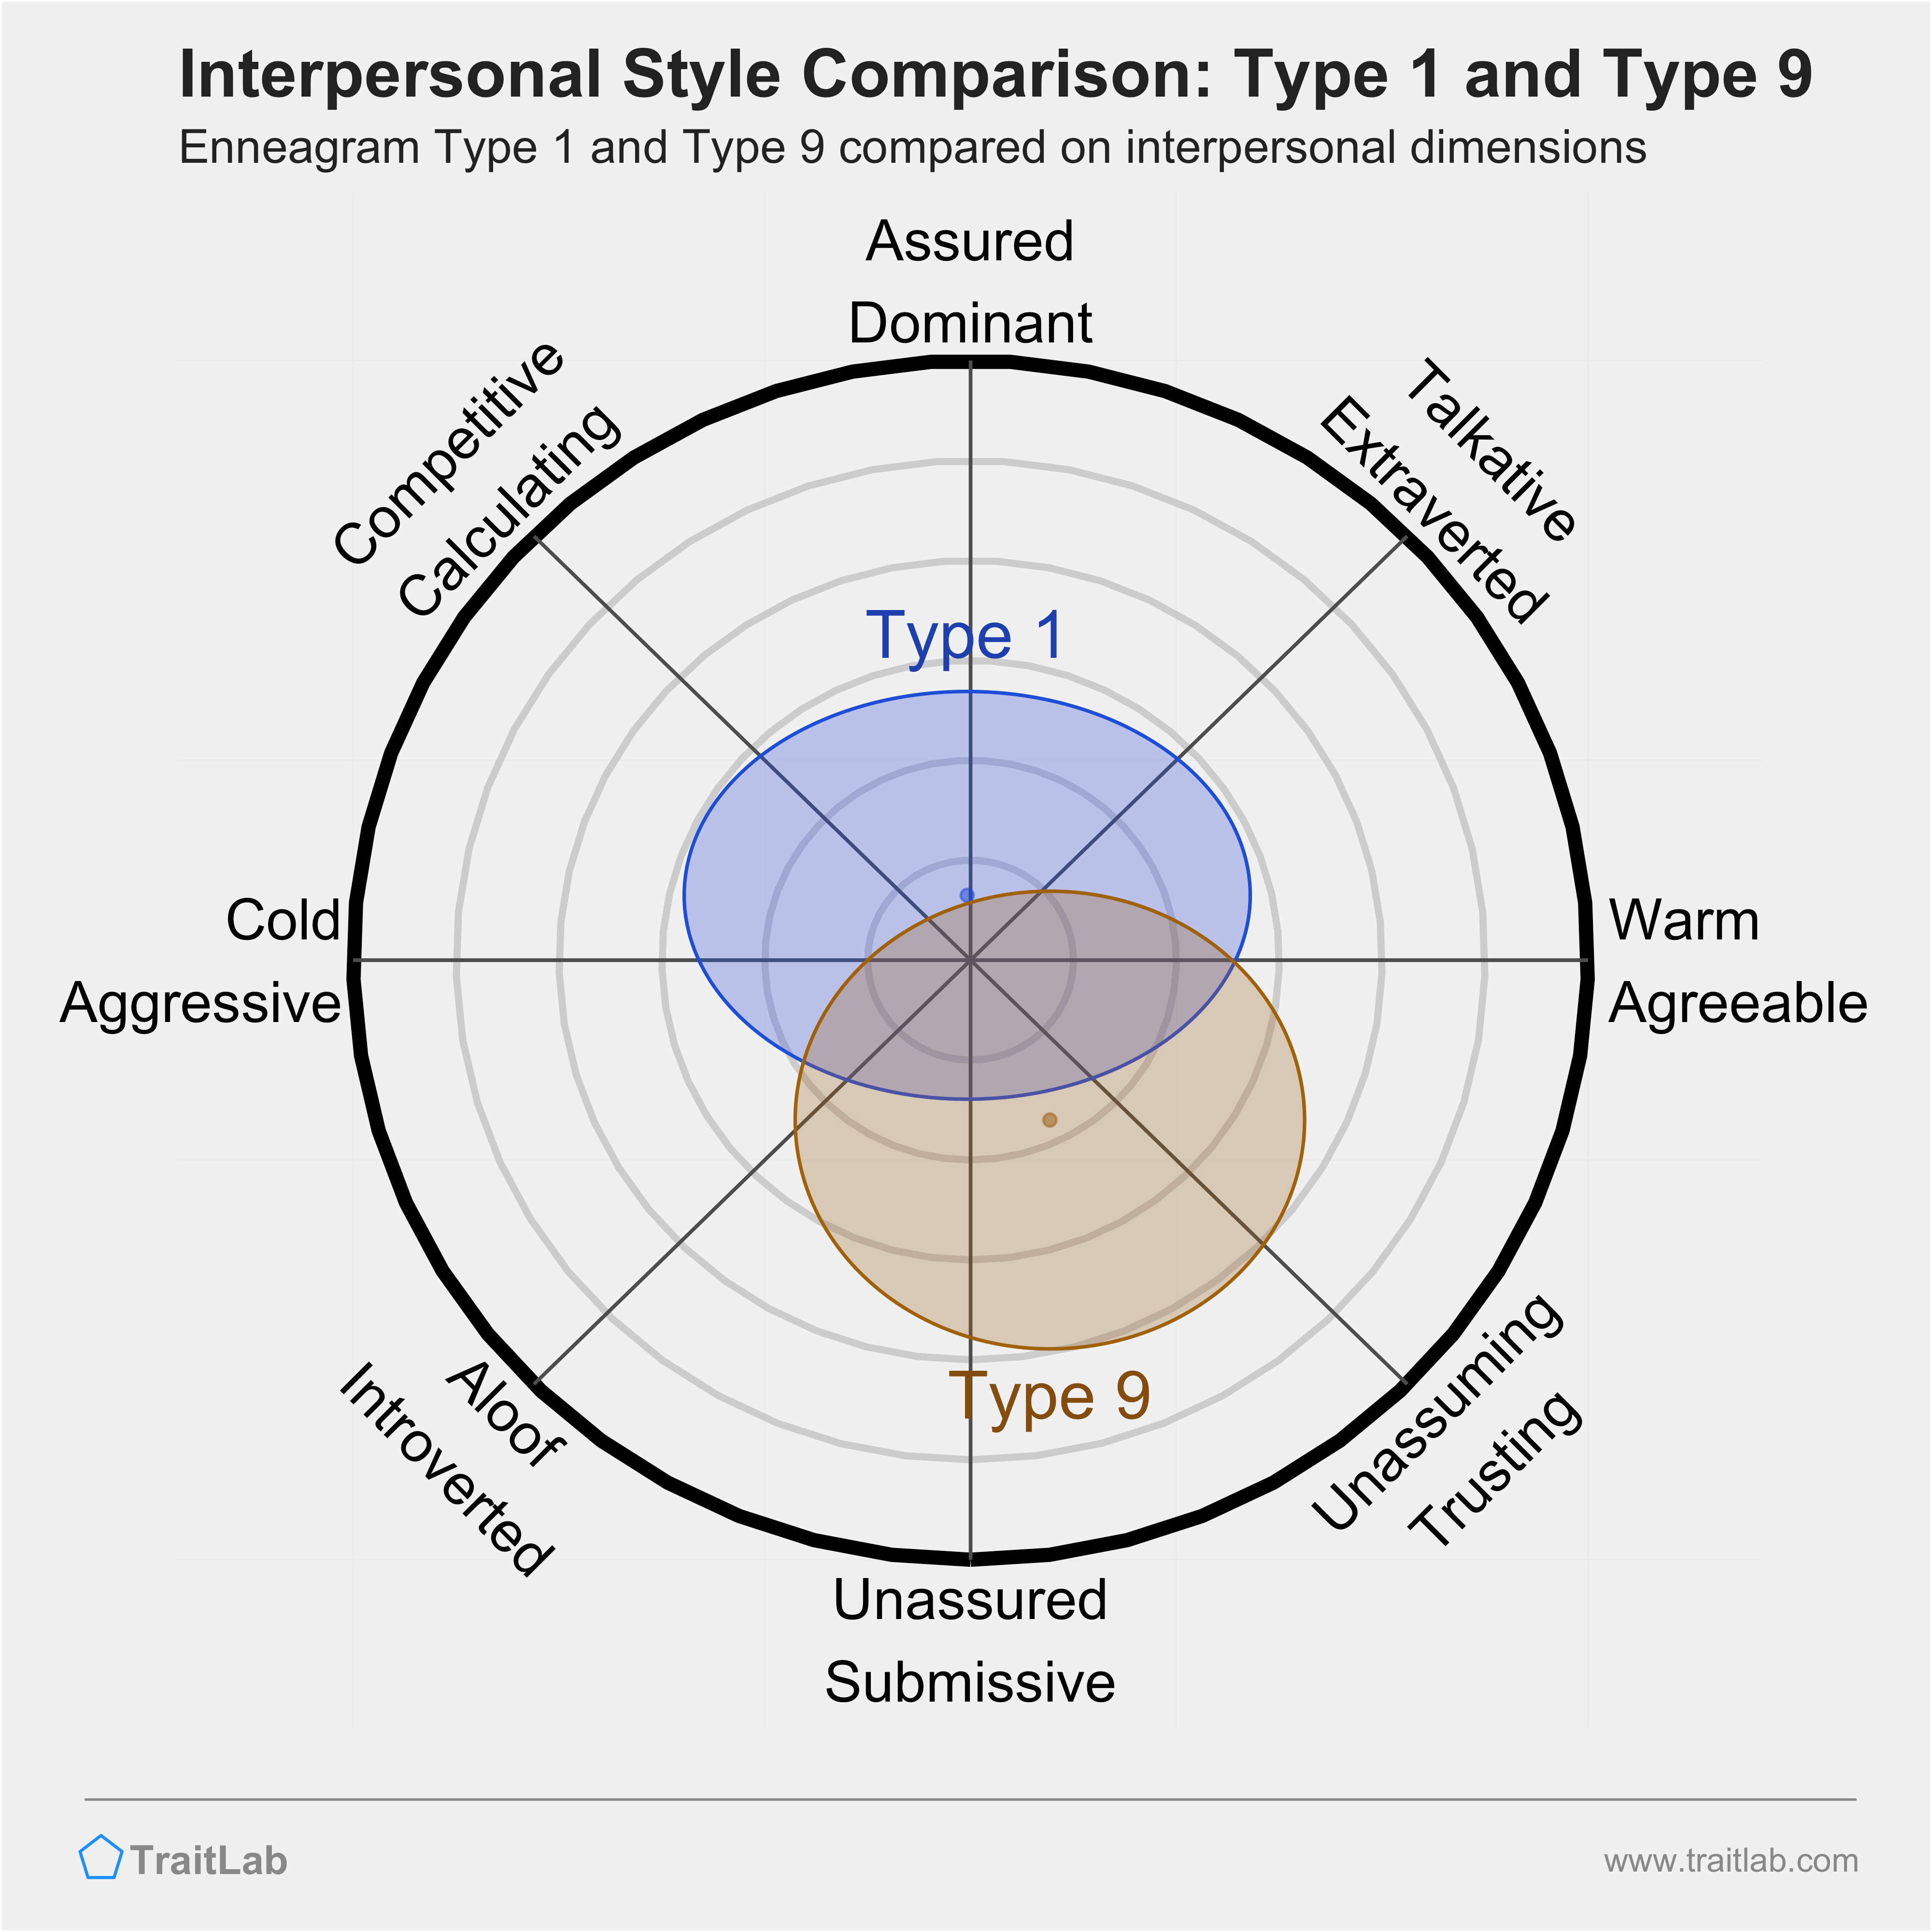 Enneagram Type 1 and Type 9 comparison across interpersonal dimensions